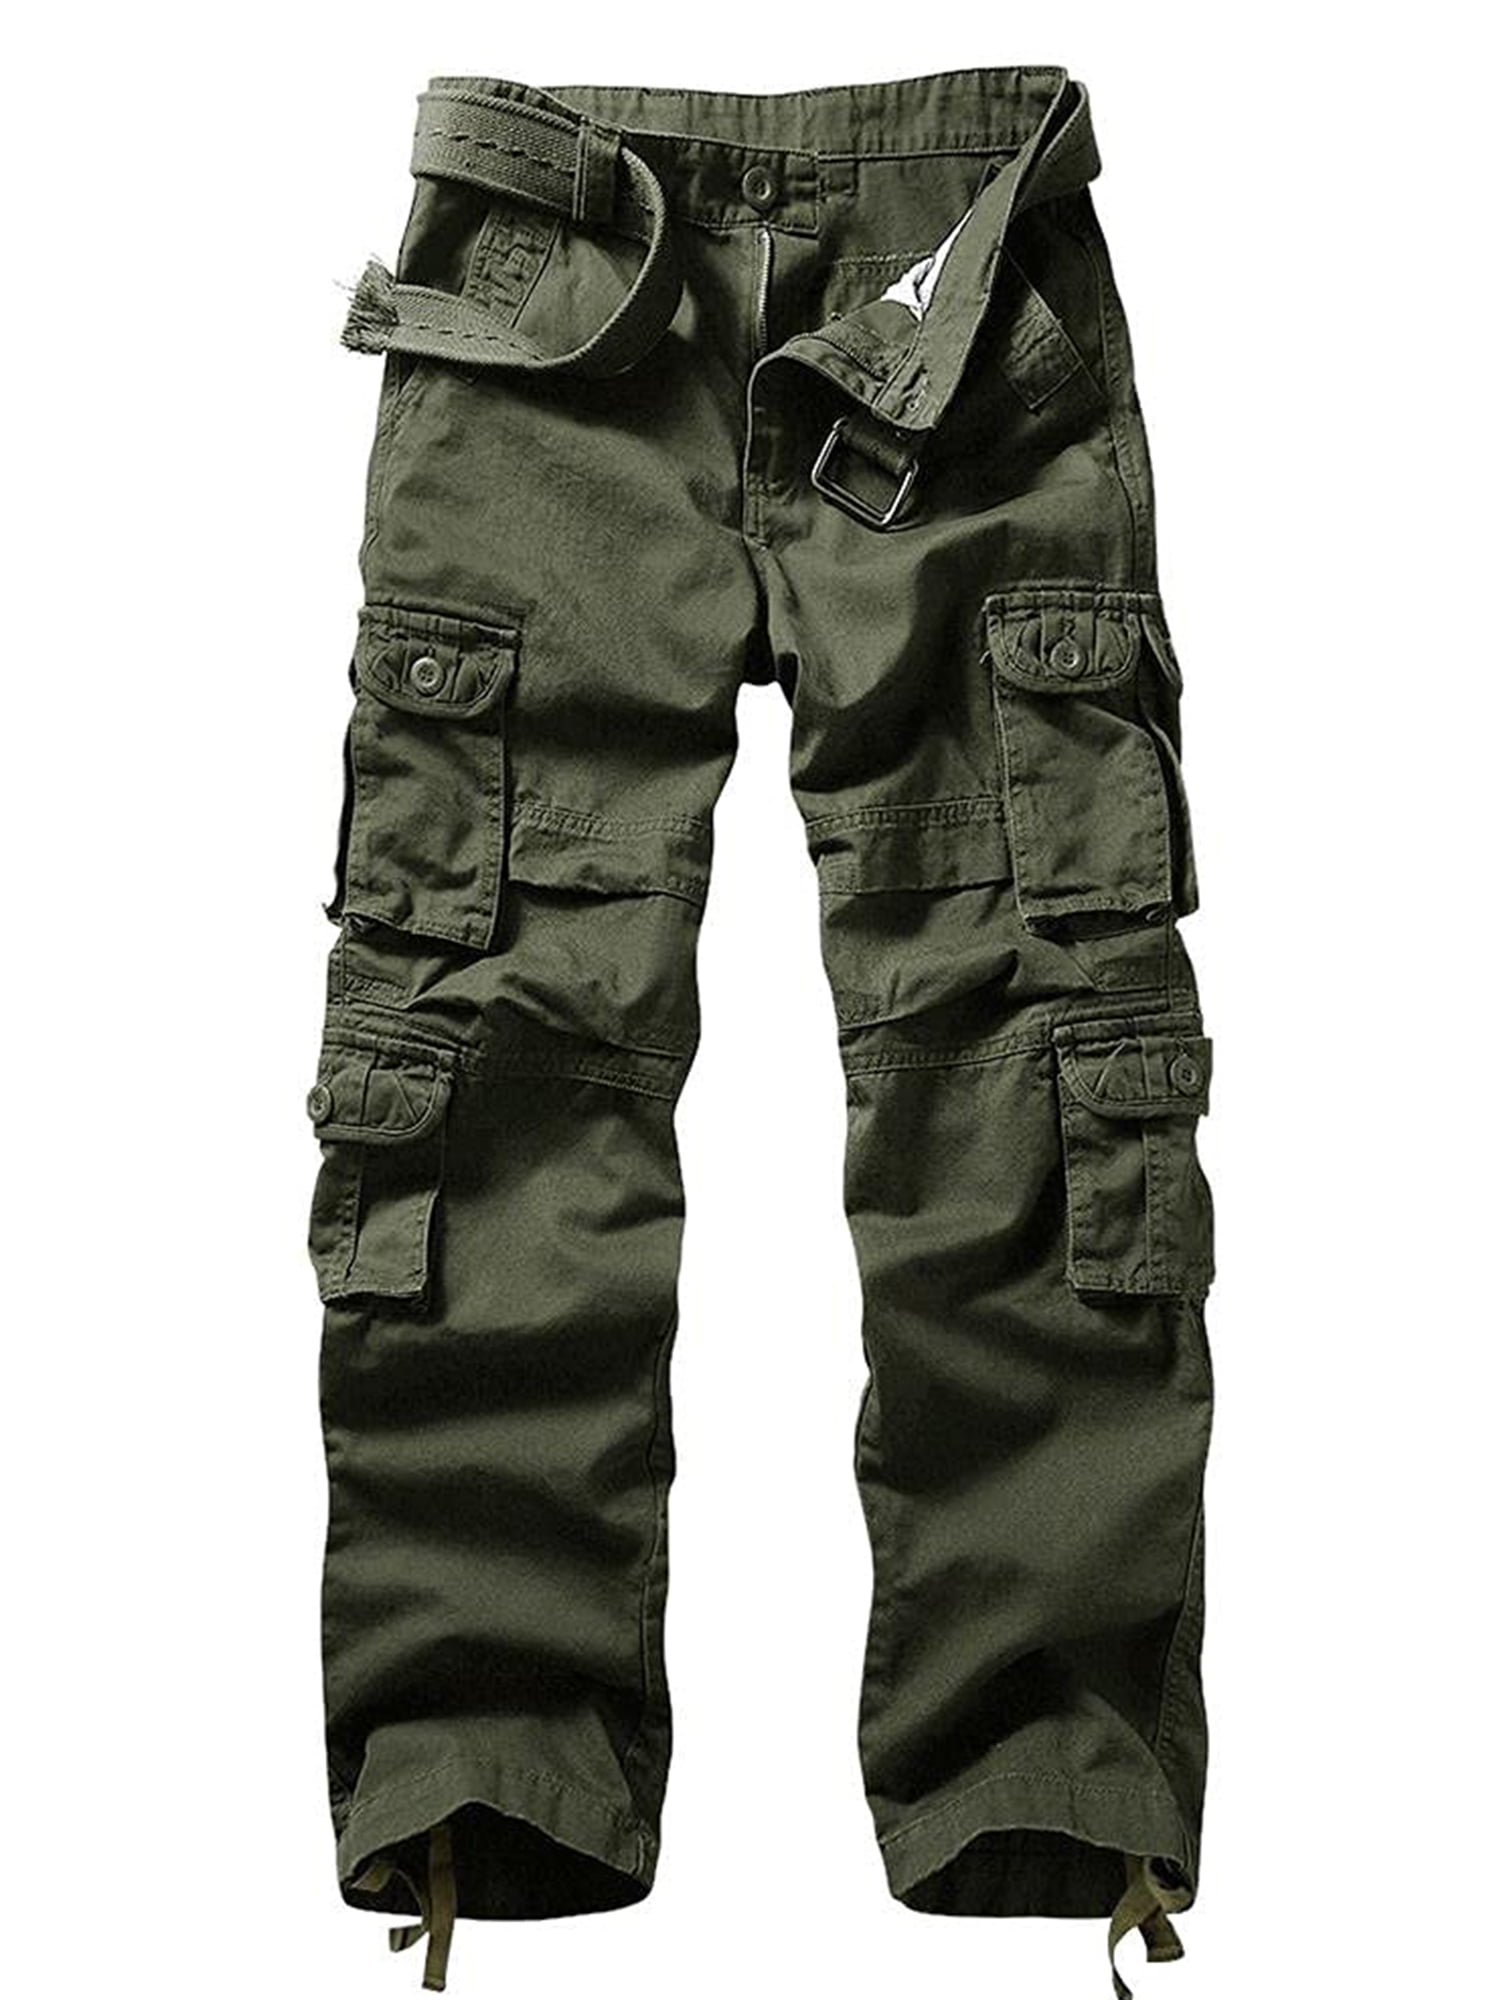 Men's Relaxed Fit Cargo Pants with Multi Pockets Outdoor Work Pants 40 ...